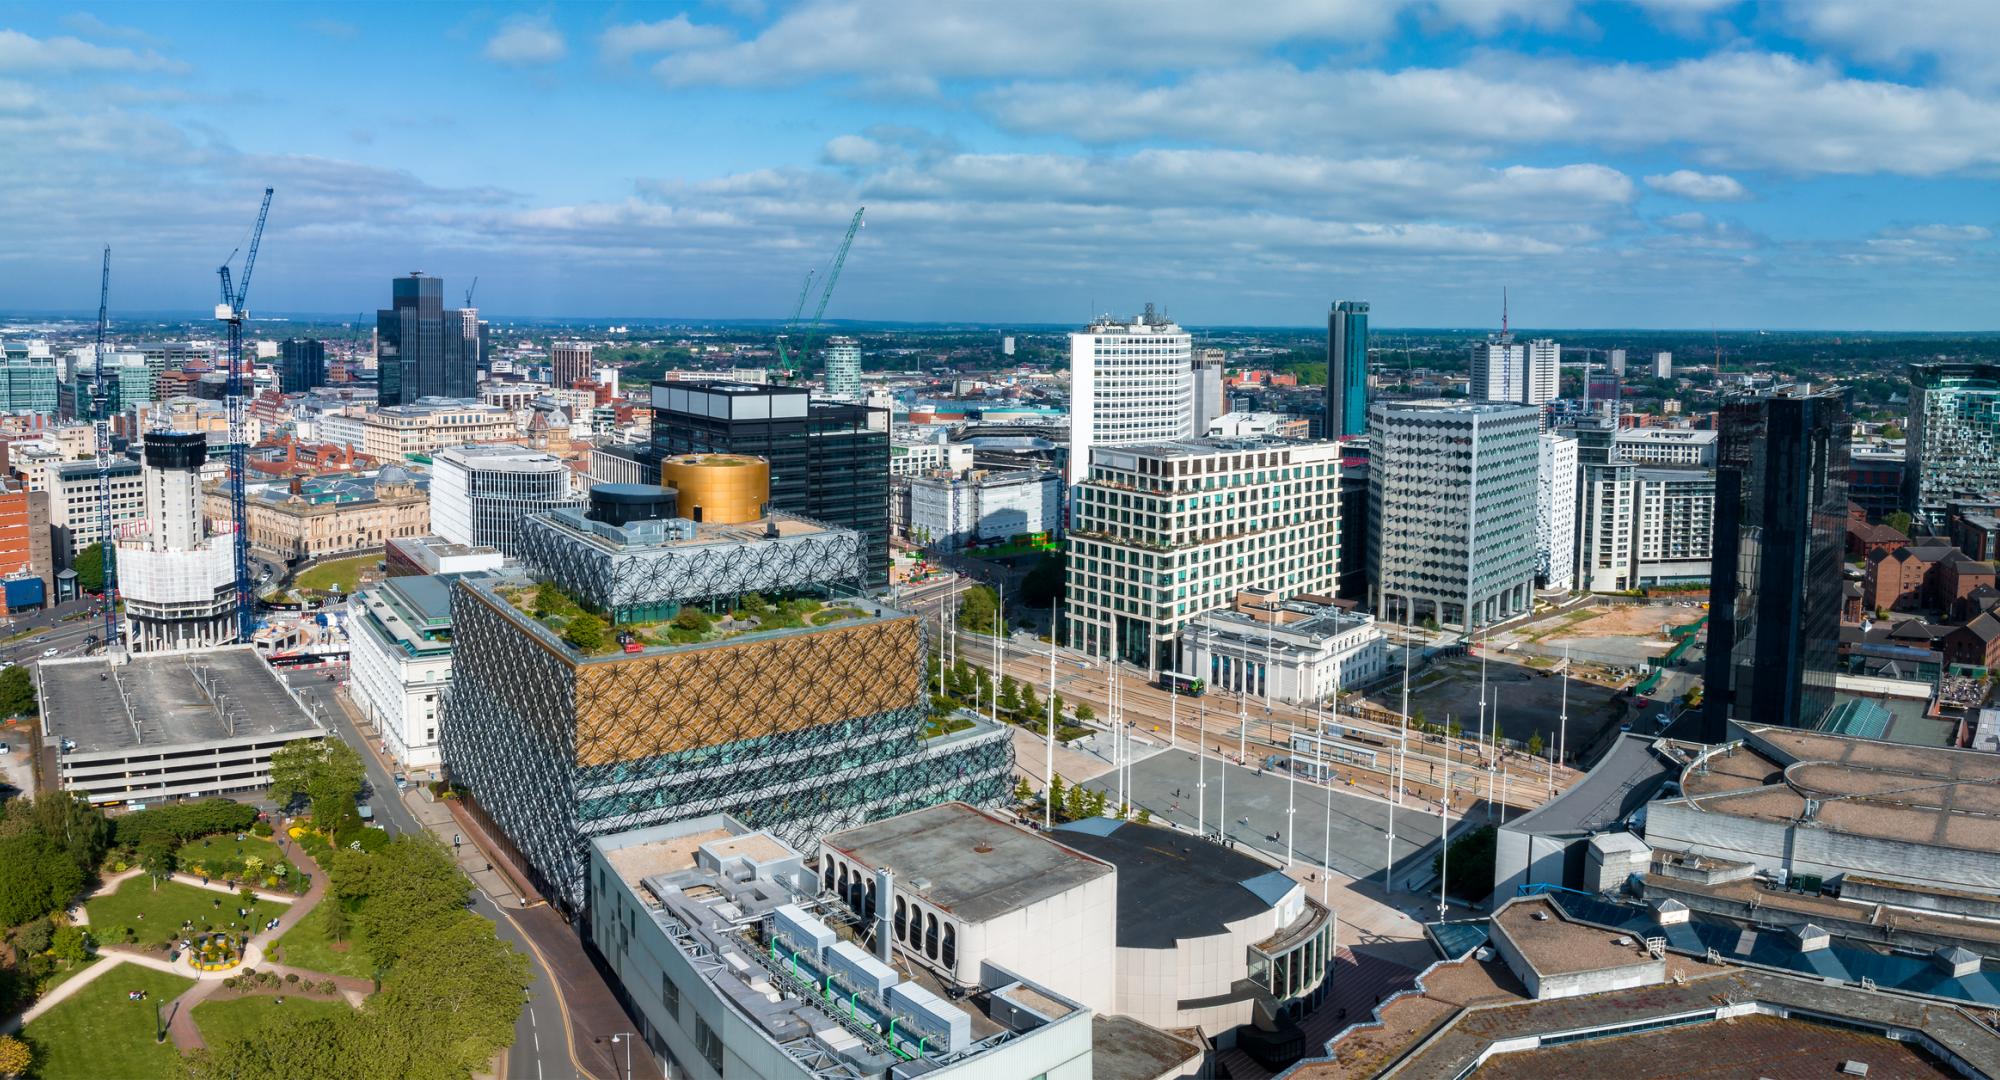 Aerial view of the library of Birmingham